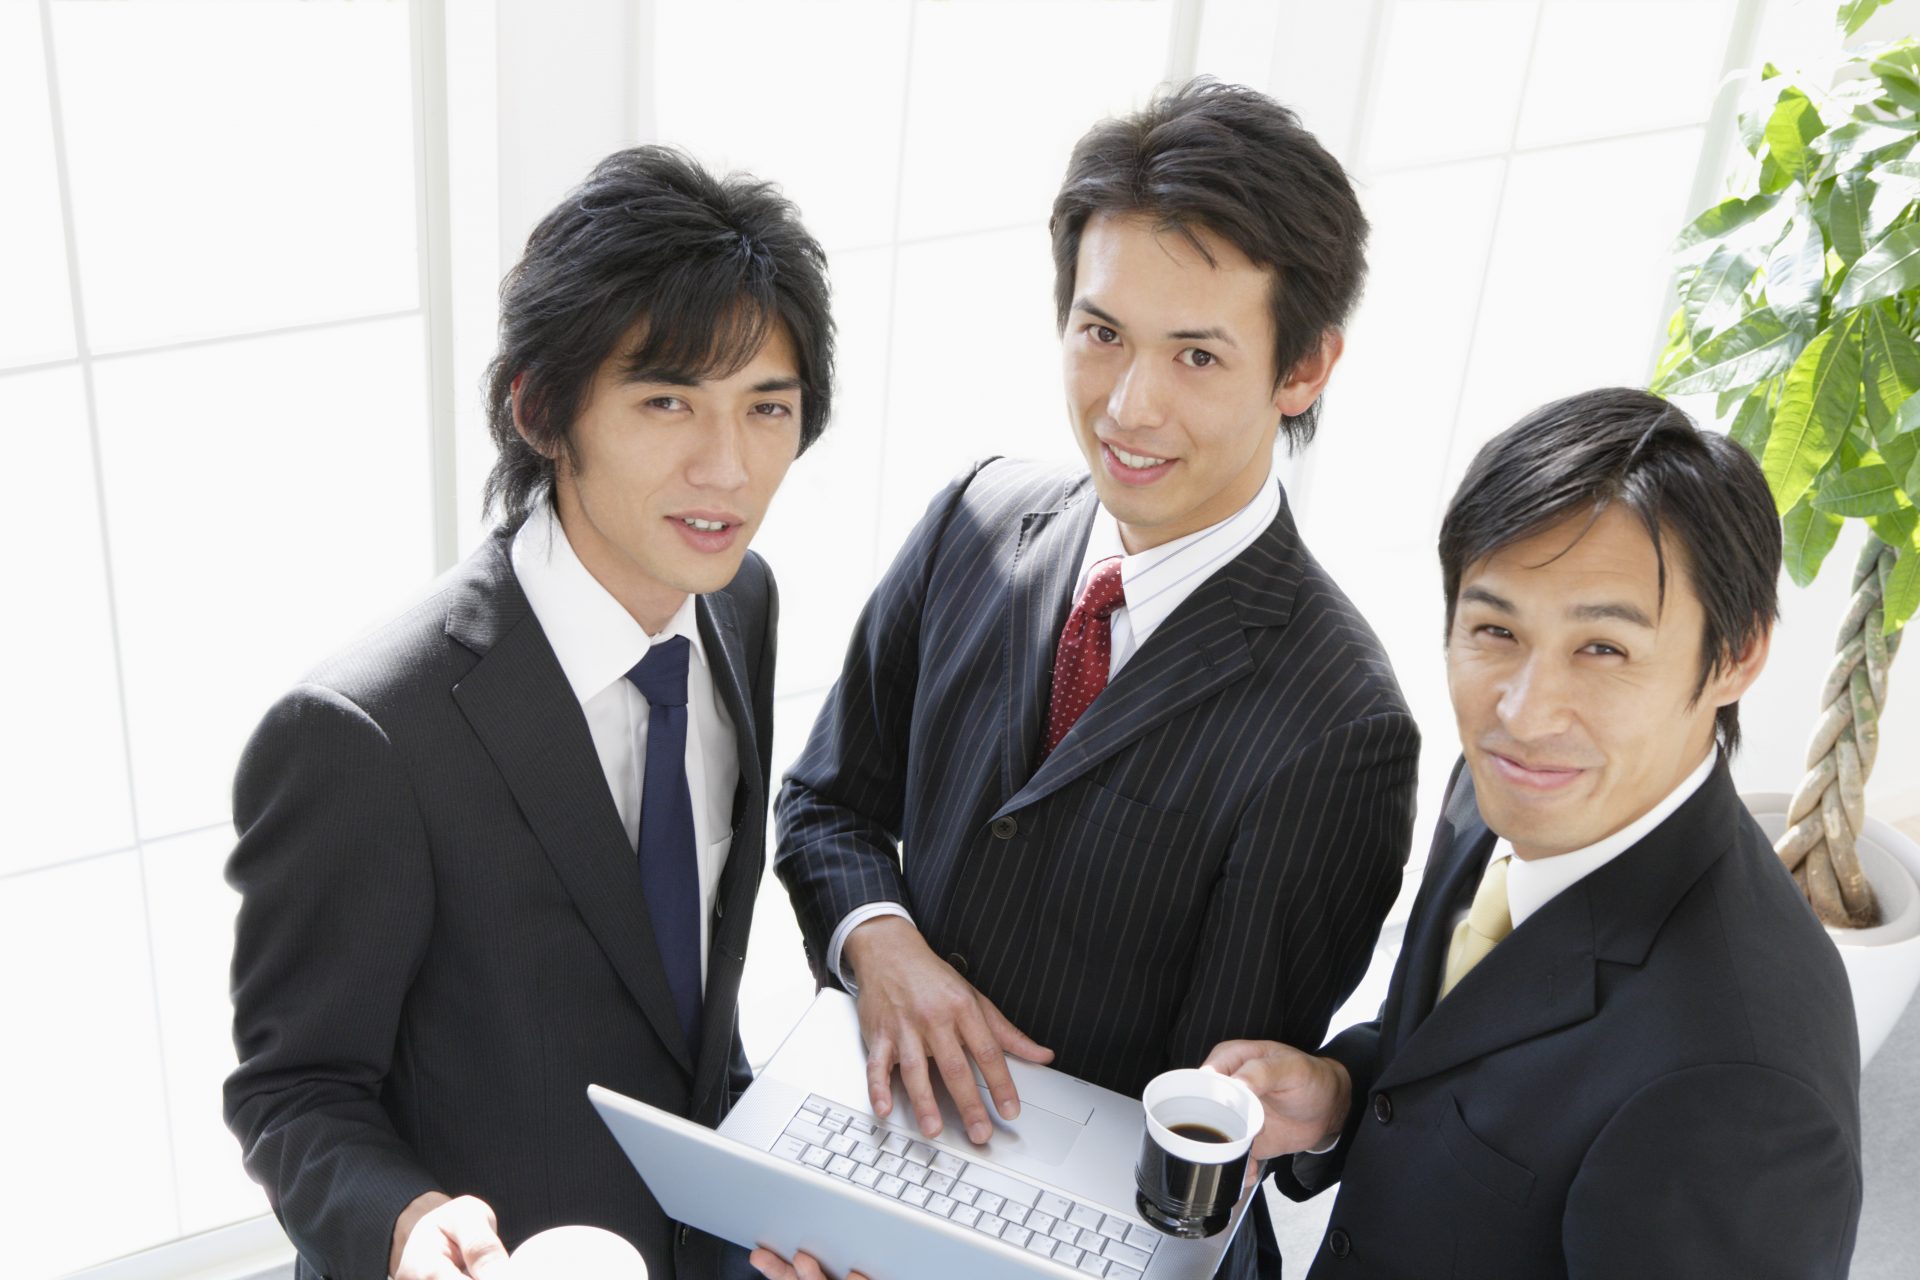 More and more Japanese men are choosing to sit on the loo